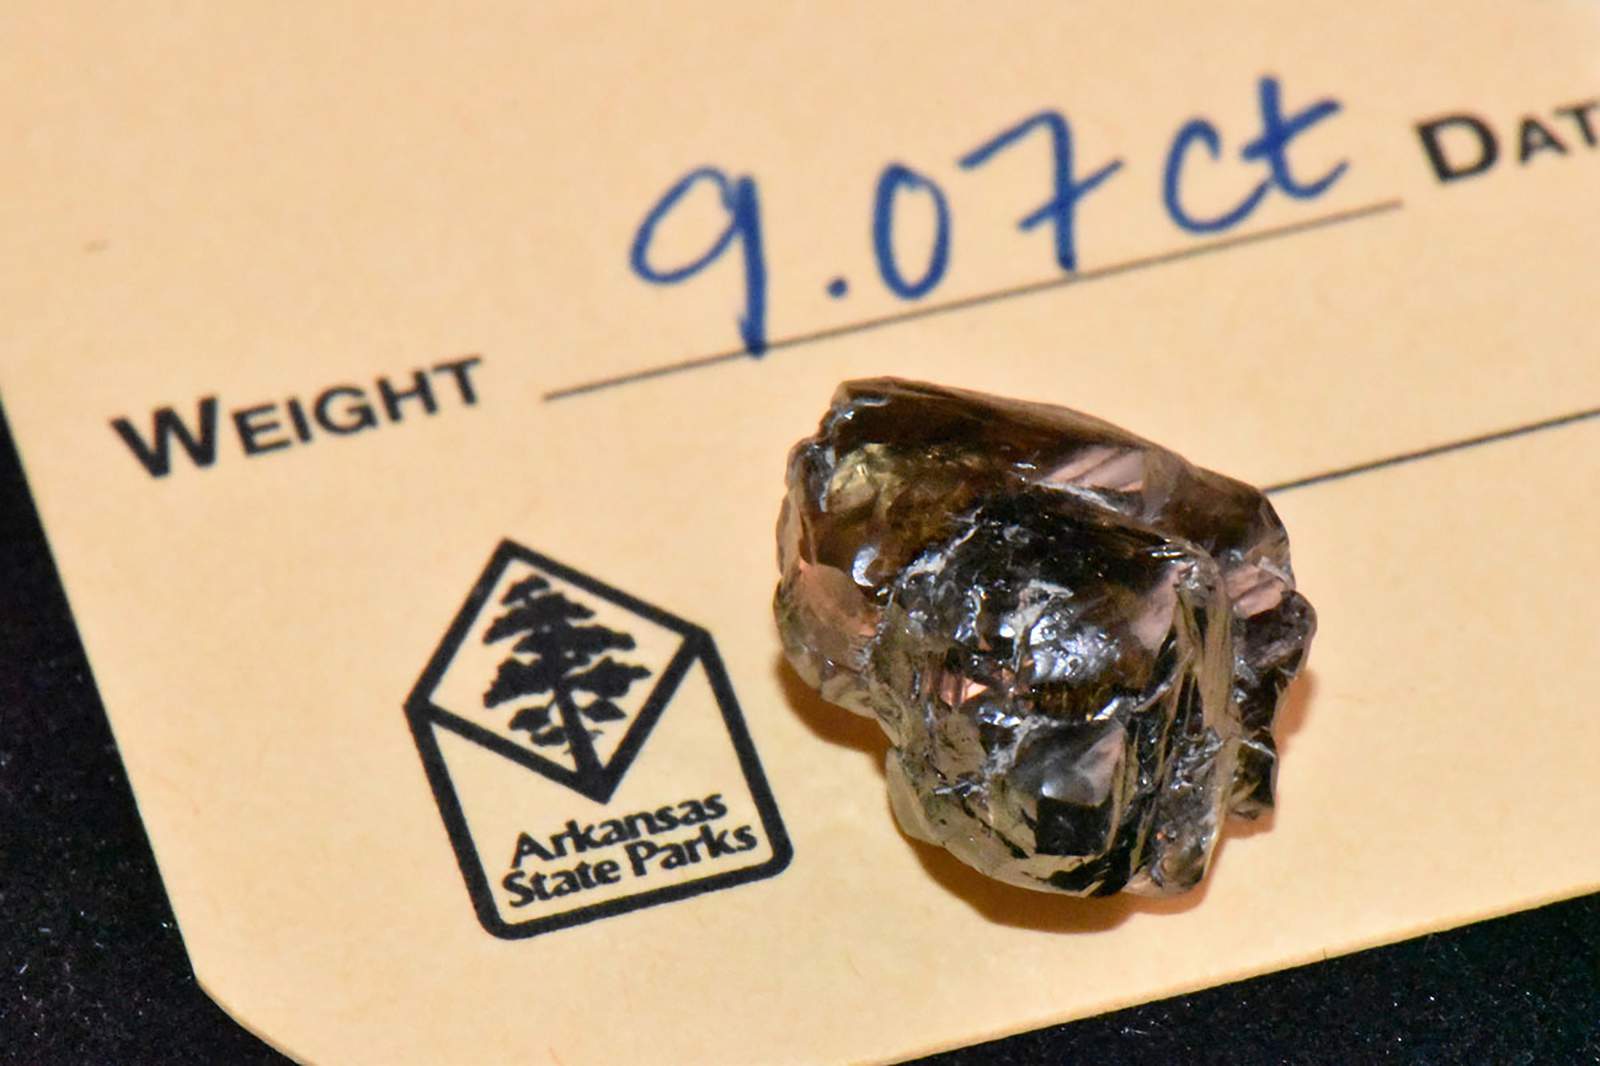 Bank manager finds 9.07-carat diamond in Arkansas state park